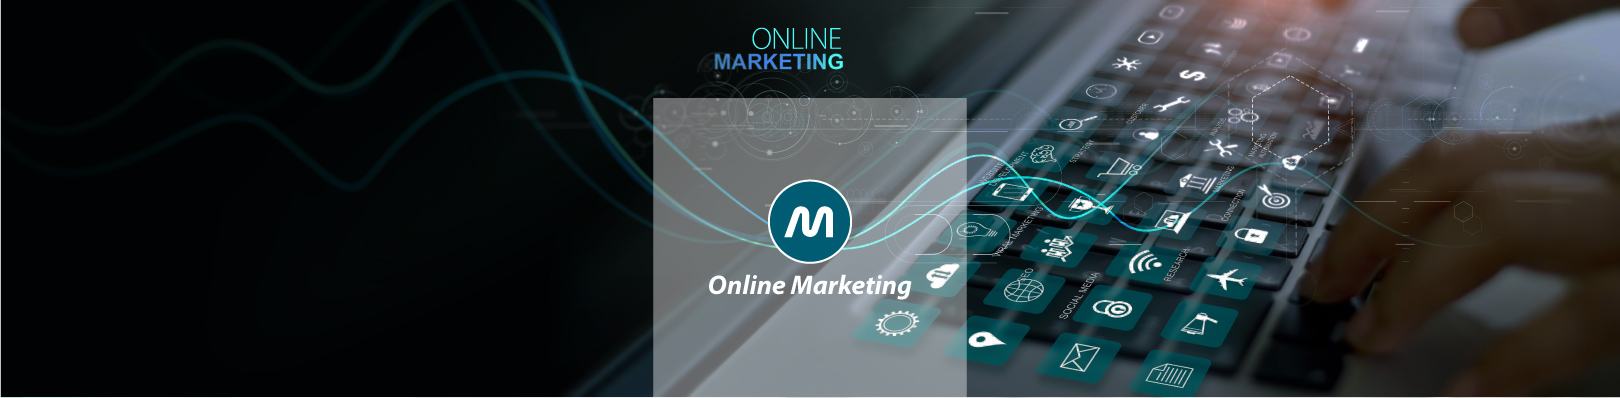 Online marketing services in Germany | Best Marketing company in Germany is HMI GmbH | Professional Marketing services in Germany with HMi GmbH | Online marketing from HMi GmbH